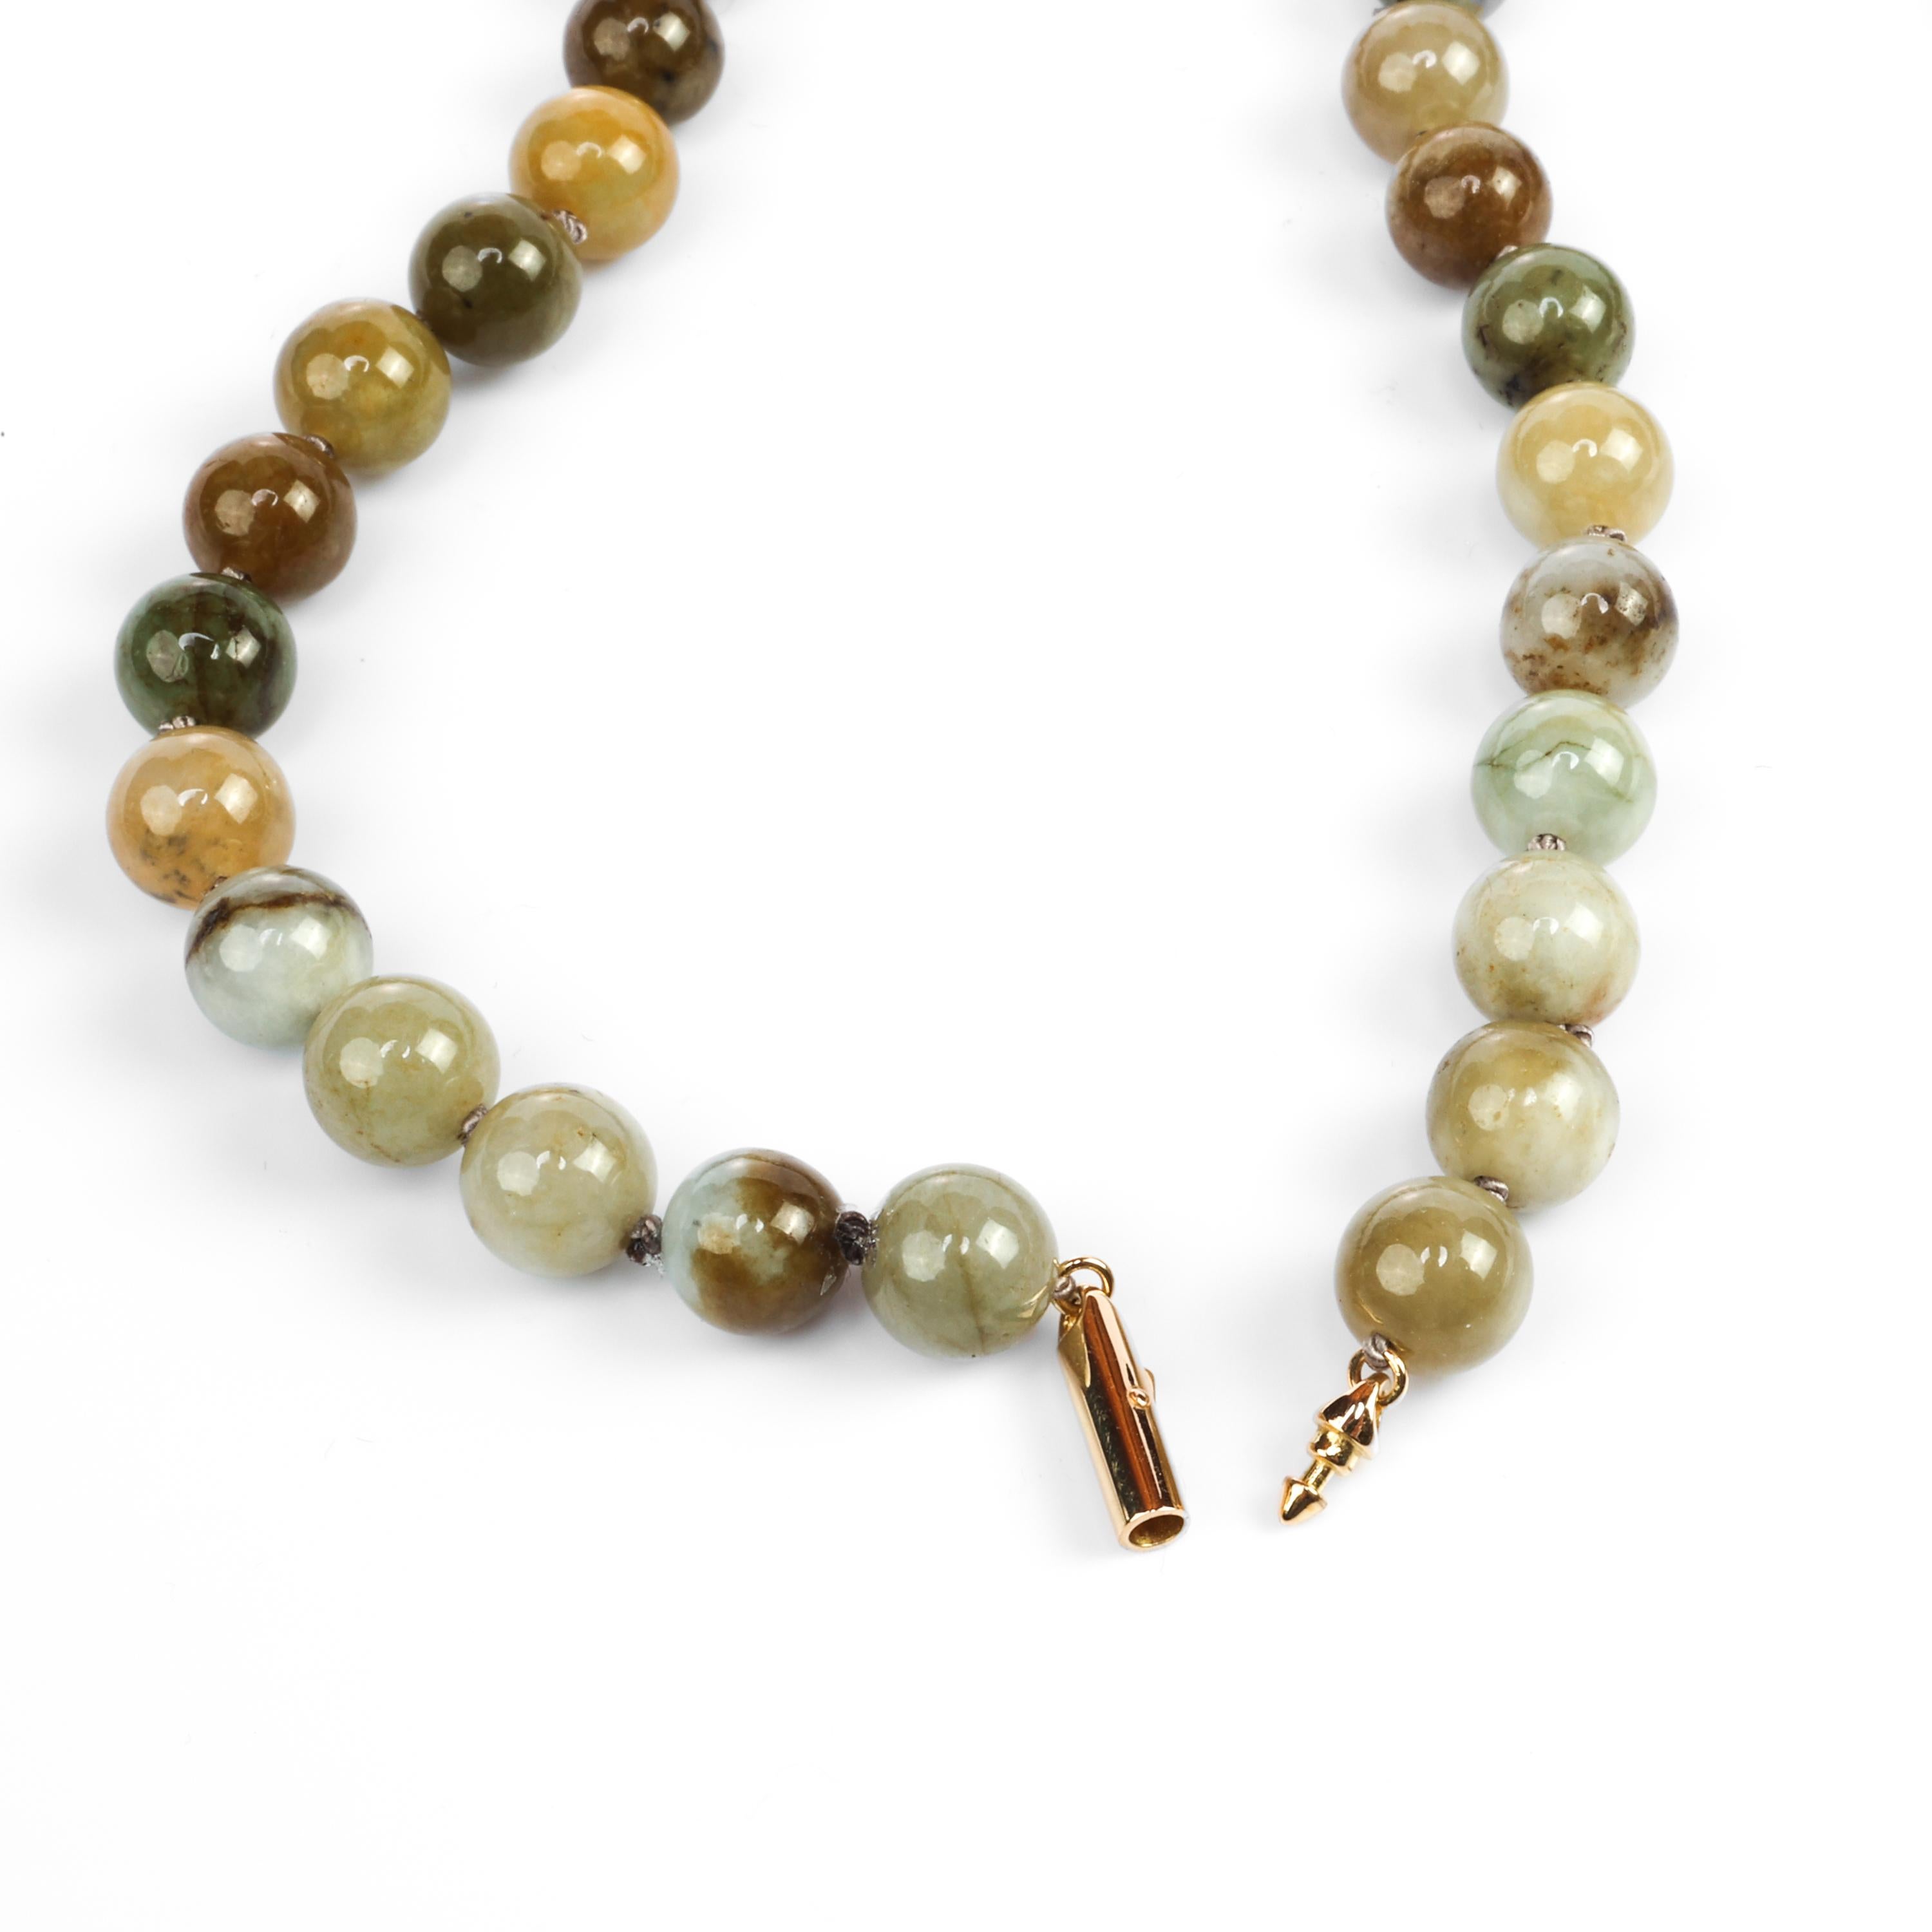 Women's or Men's Jade Necklace Late Autumn Coloring Certified Untreated